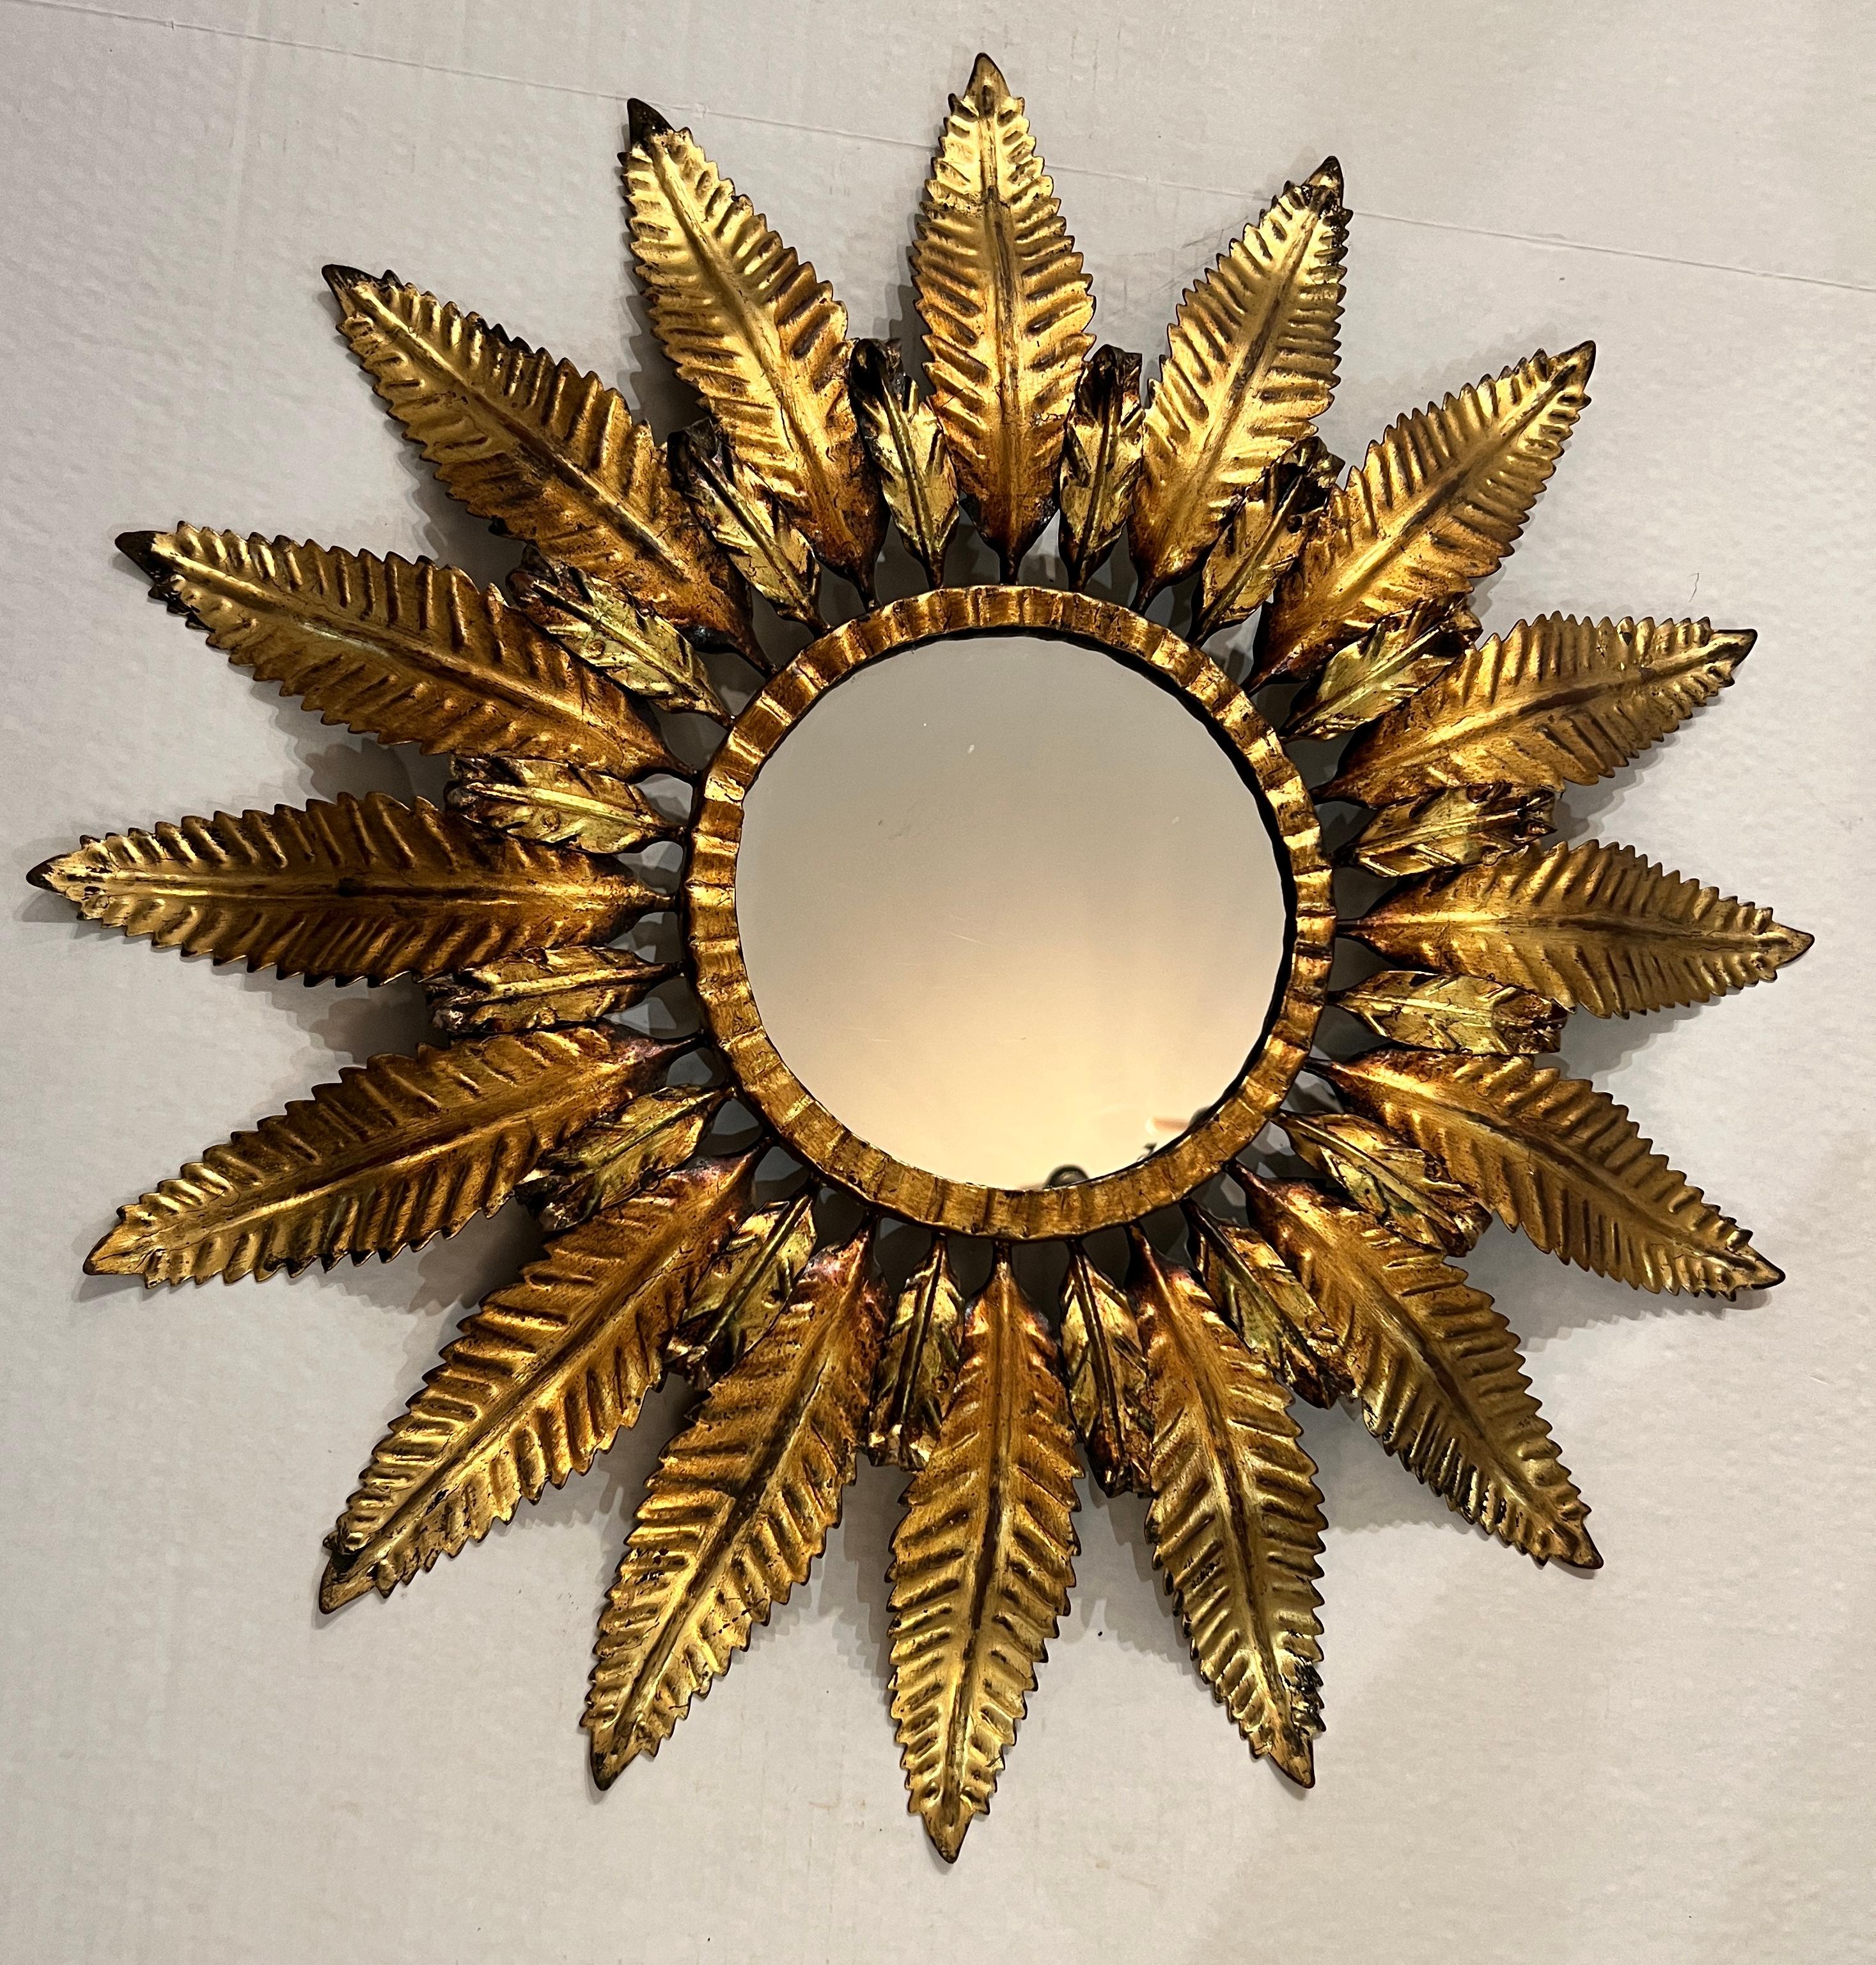 1940's French Gilt Metal Sunburst Mirror  In Excellent Condition For Sale In Mt Kisco, NY